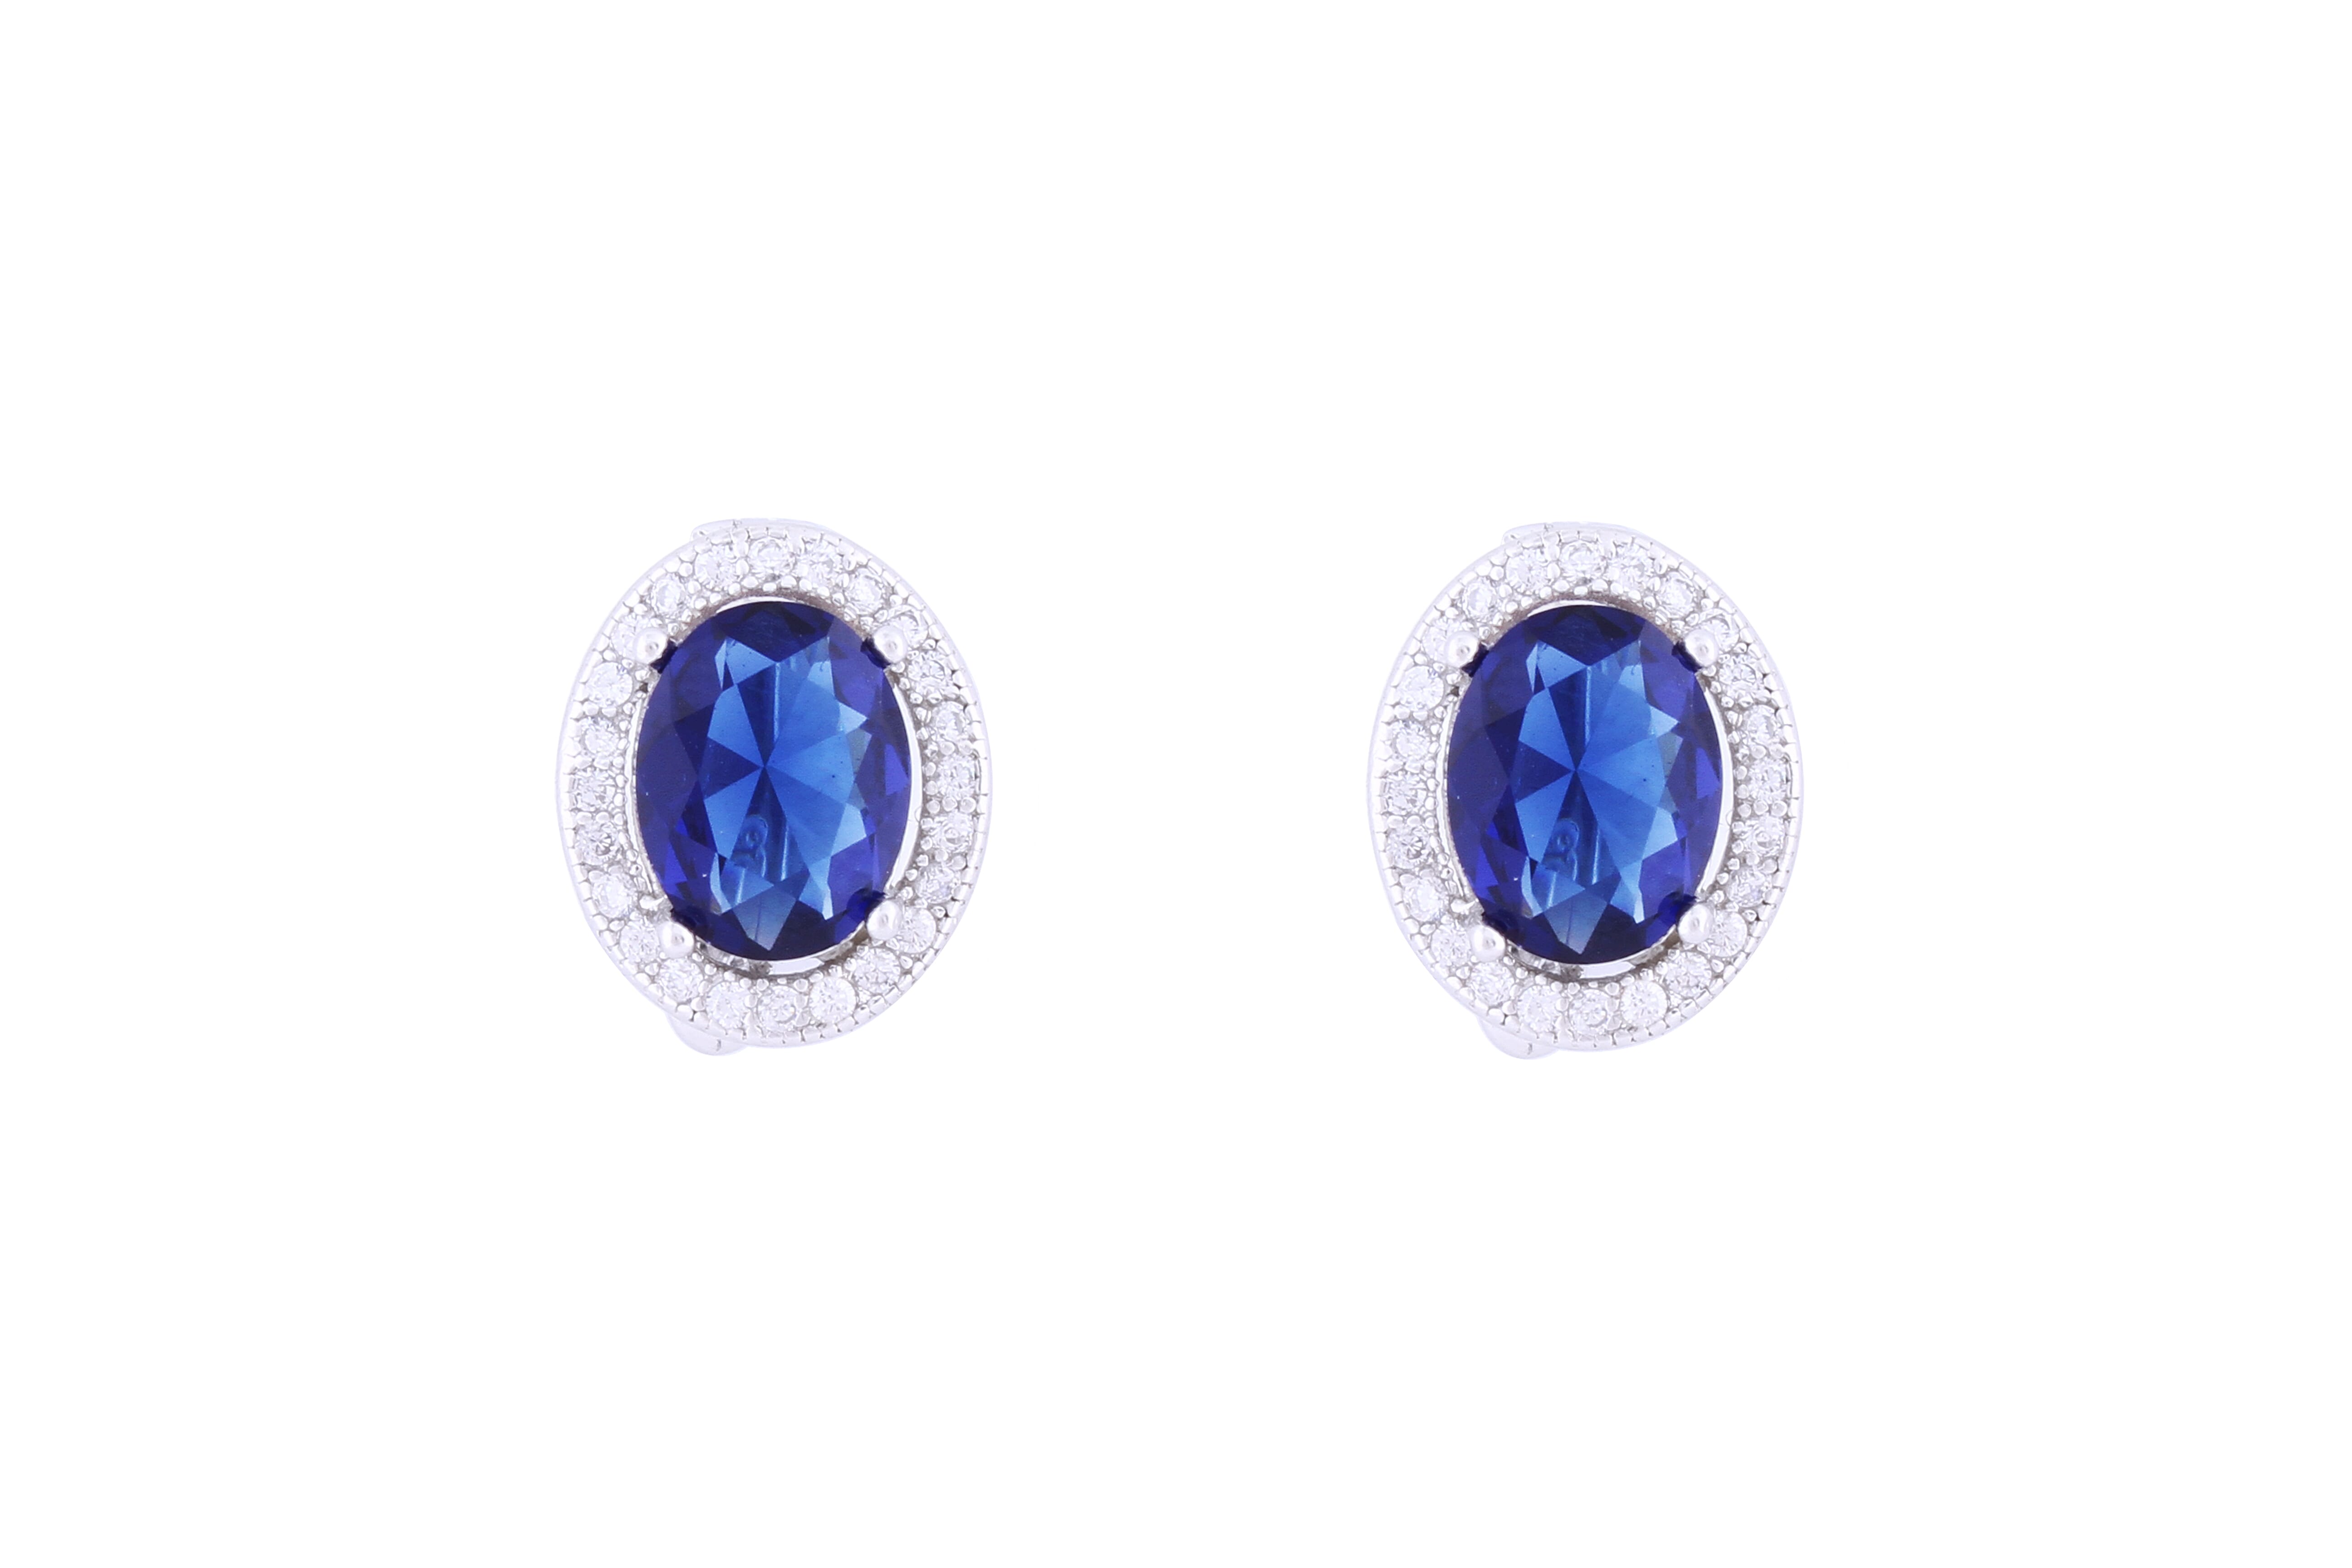 Asfour Crystal Clips Earrings with Blue Oval Design in 925 Sterling Silver ER0364-B